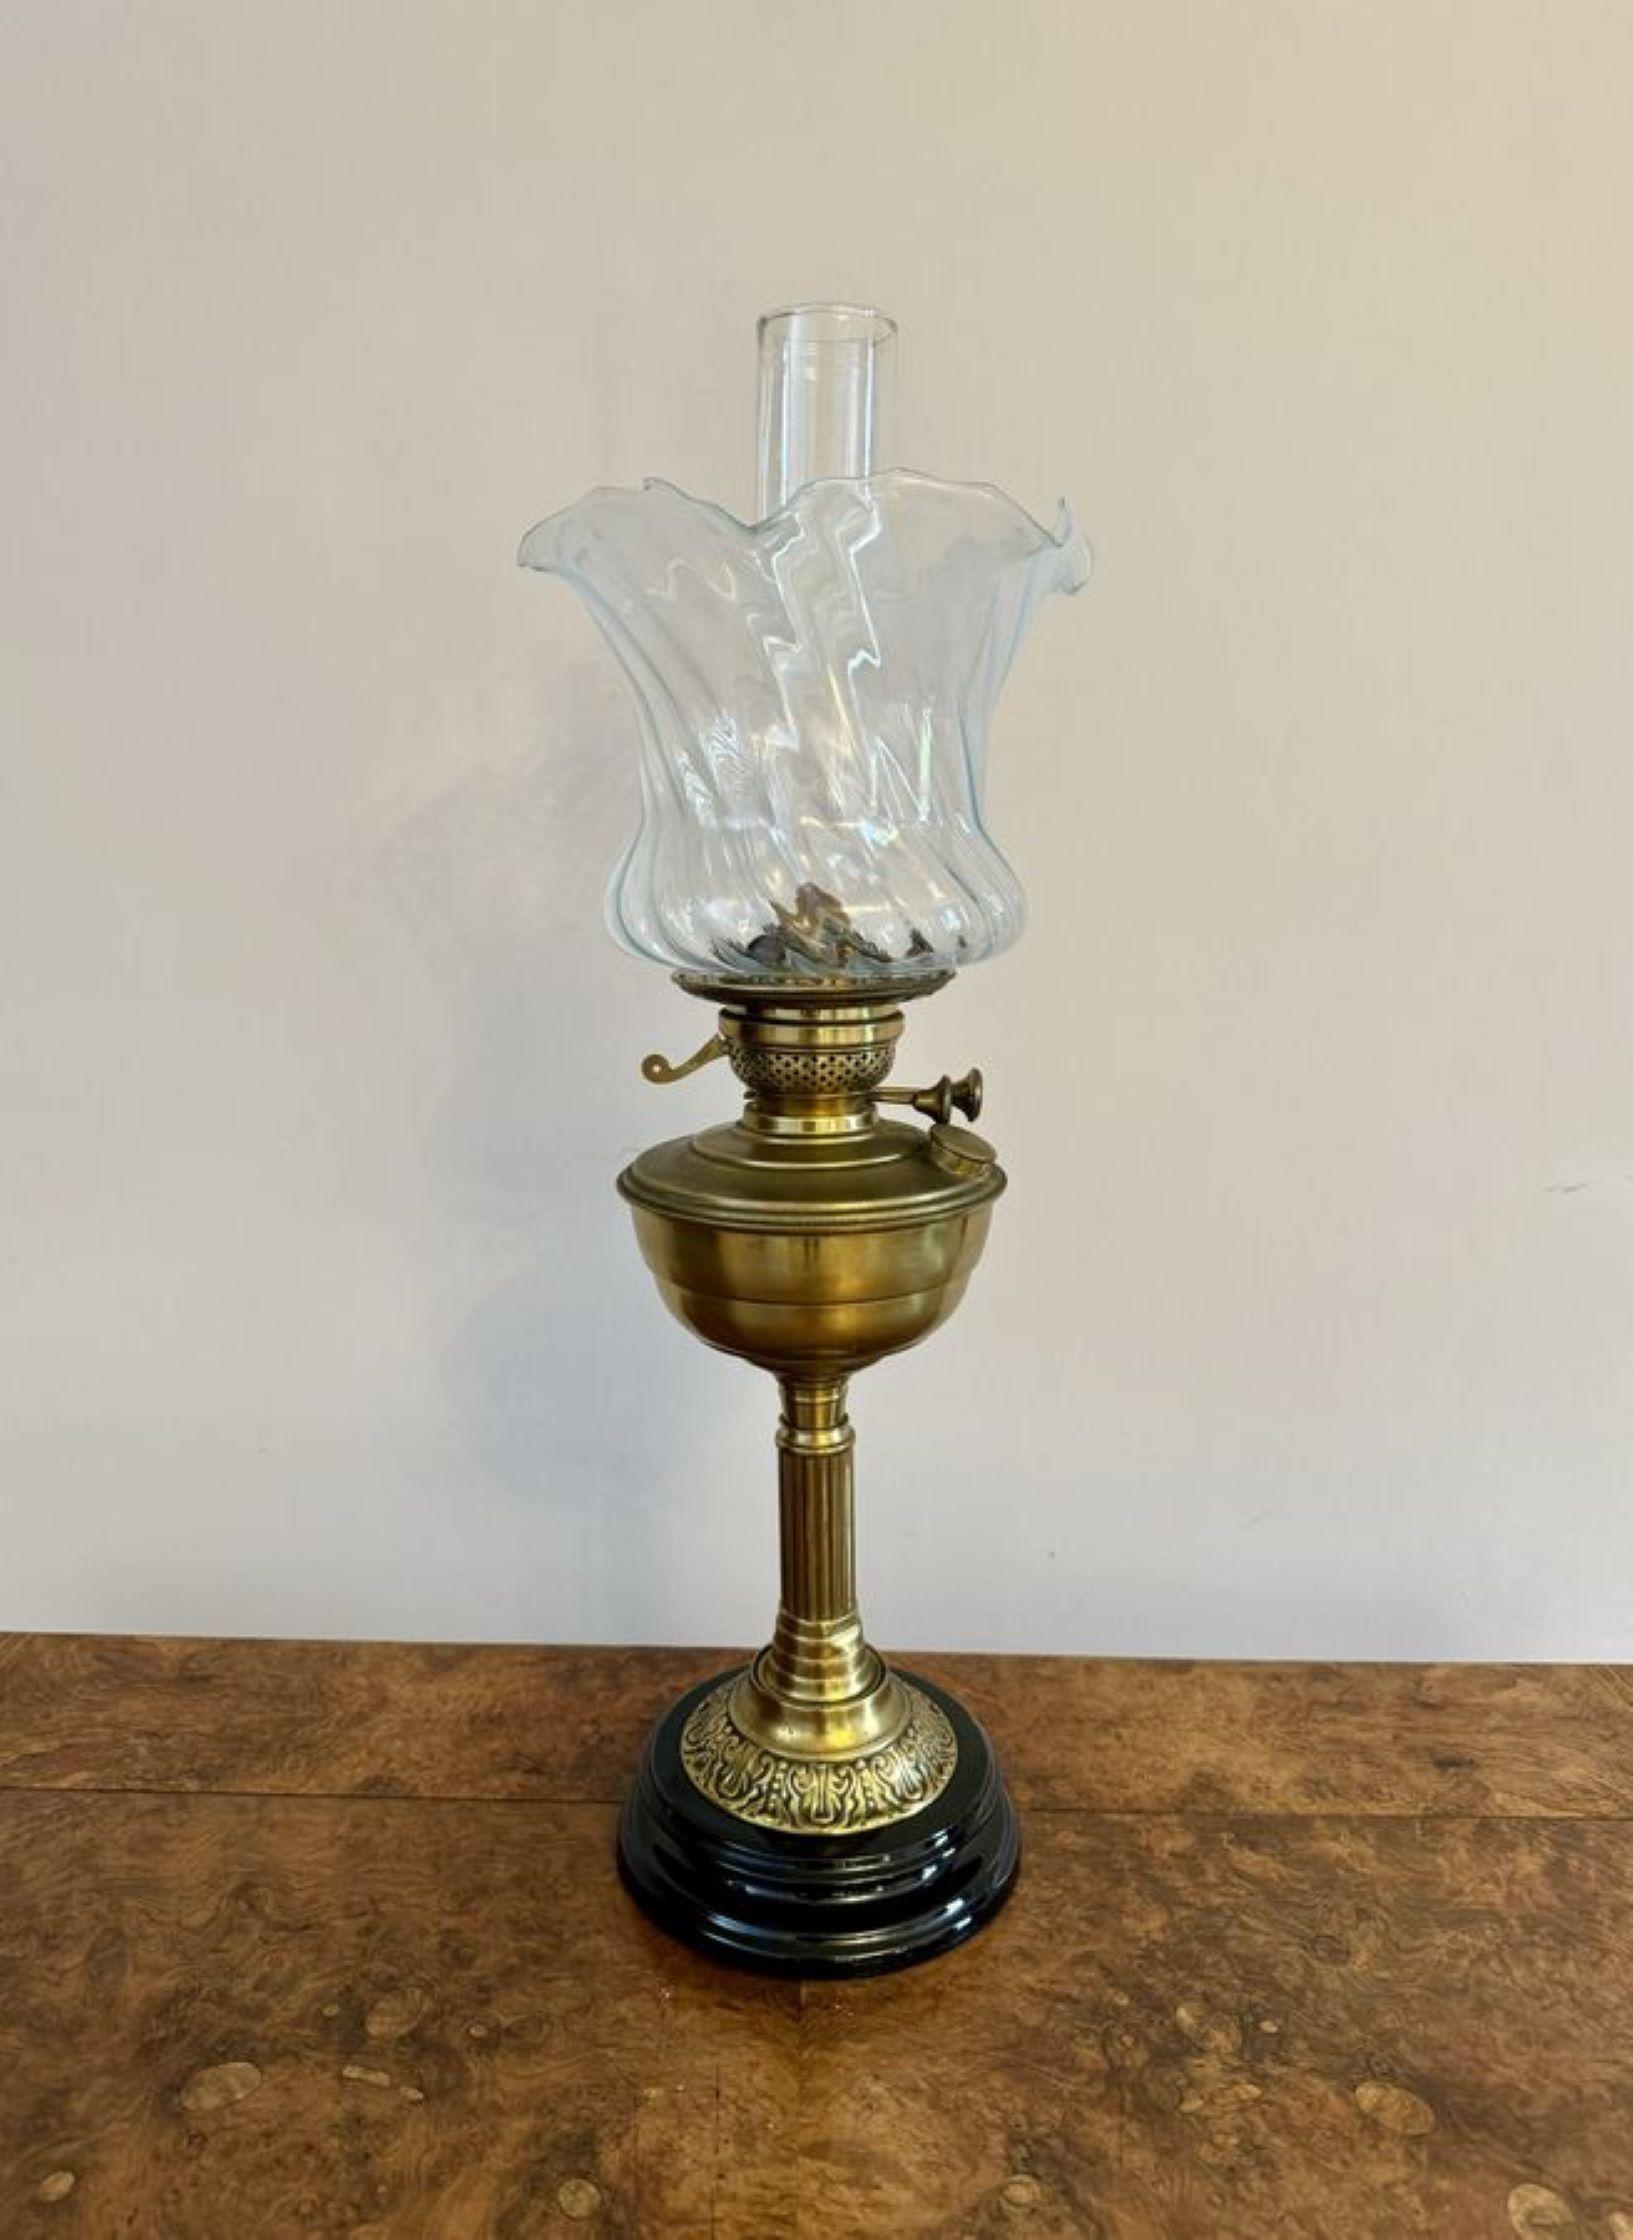 Pretty antique Edwardian quality oil lamp, having the original glass shade with a wavy shaped edge, a glass chimney, a brass burner, supported by a brass column, raised on a circular base.

D. 1900